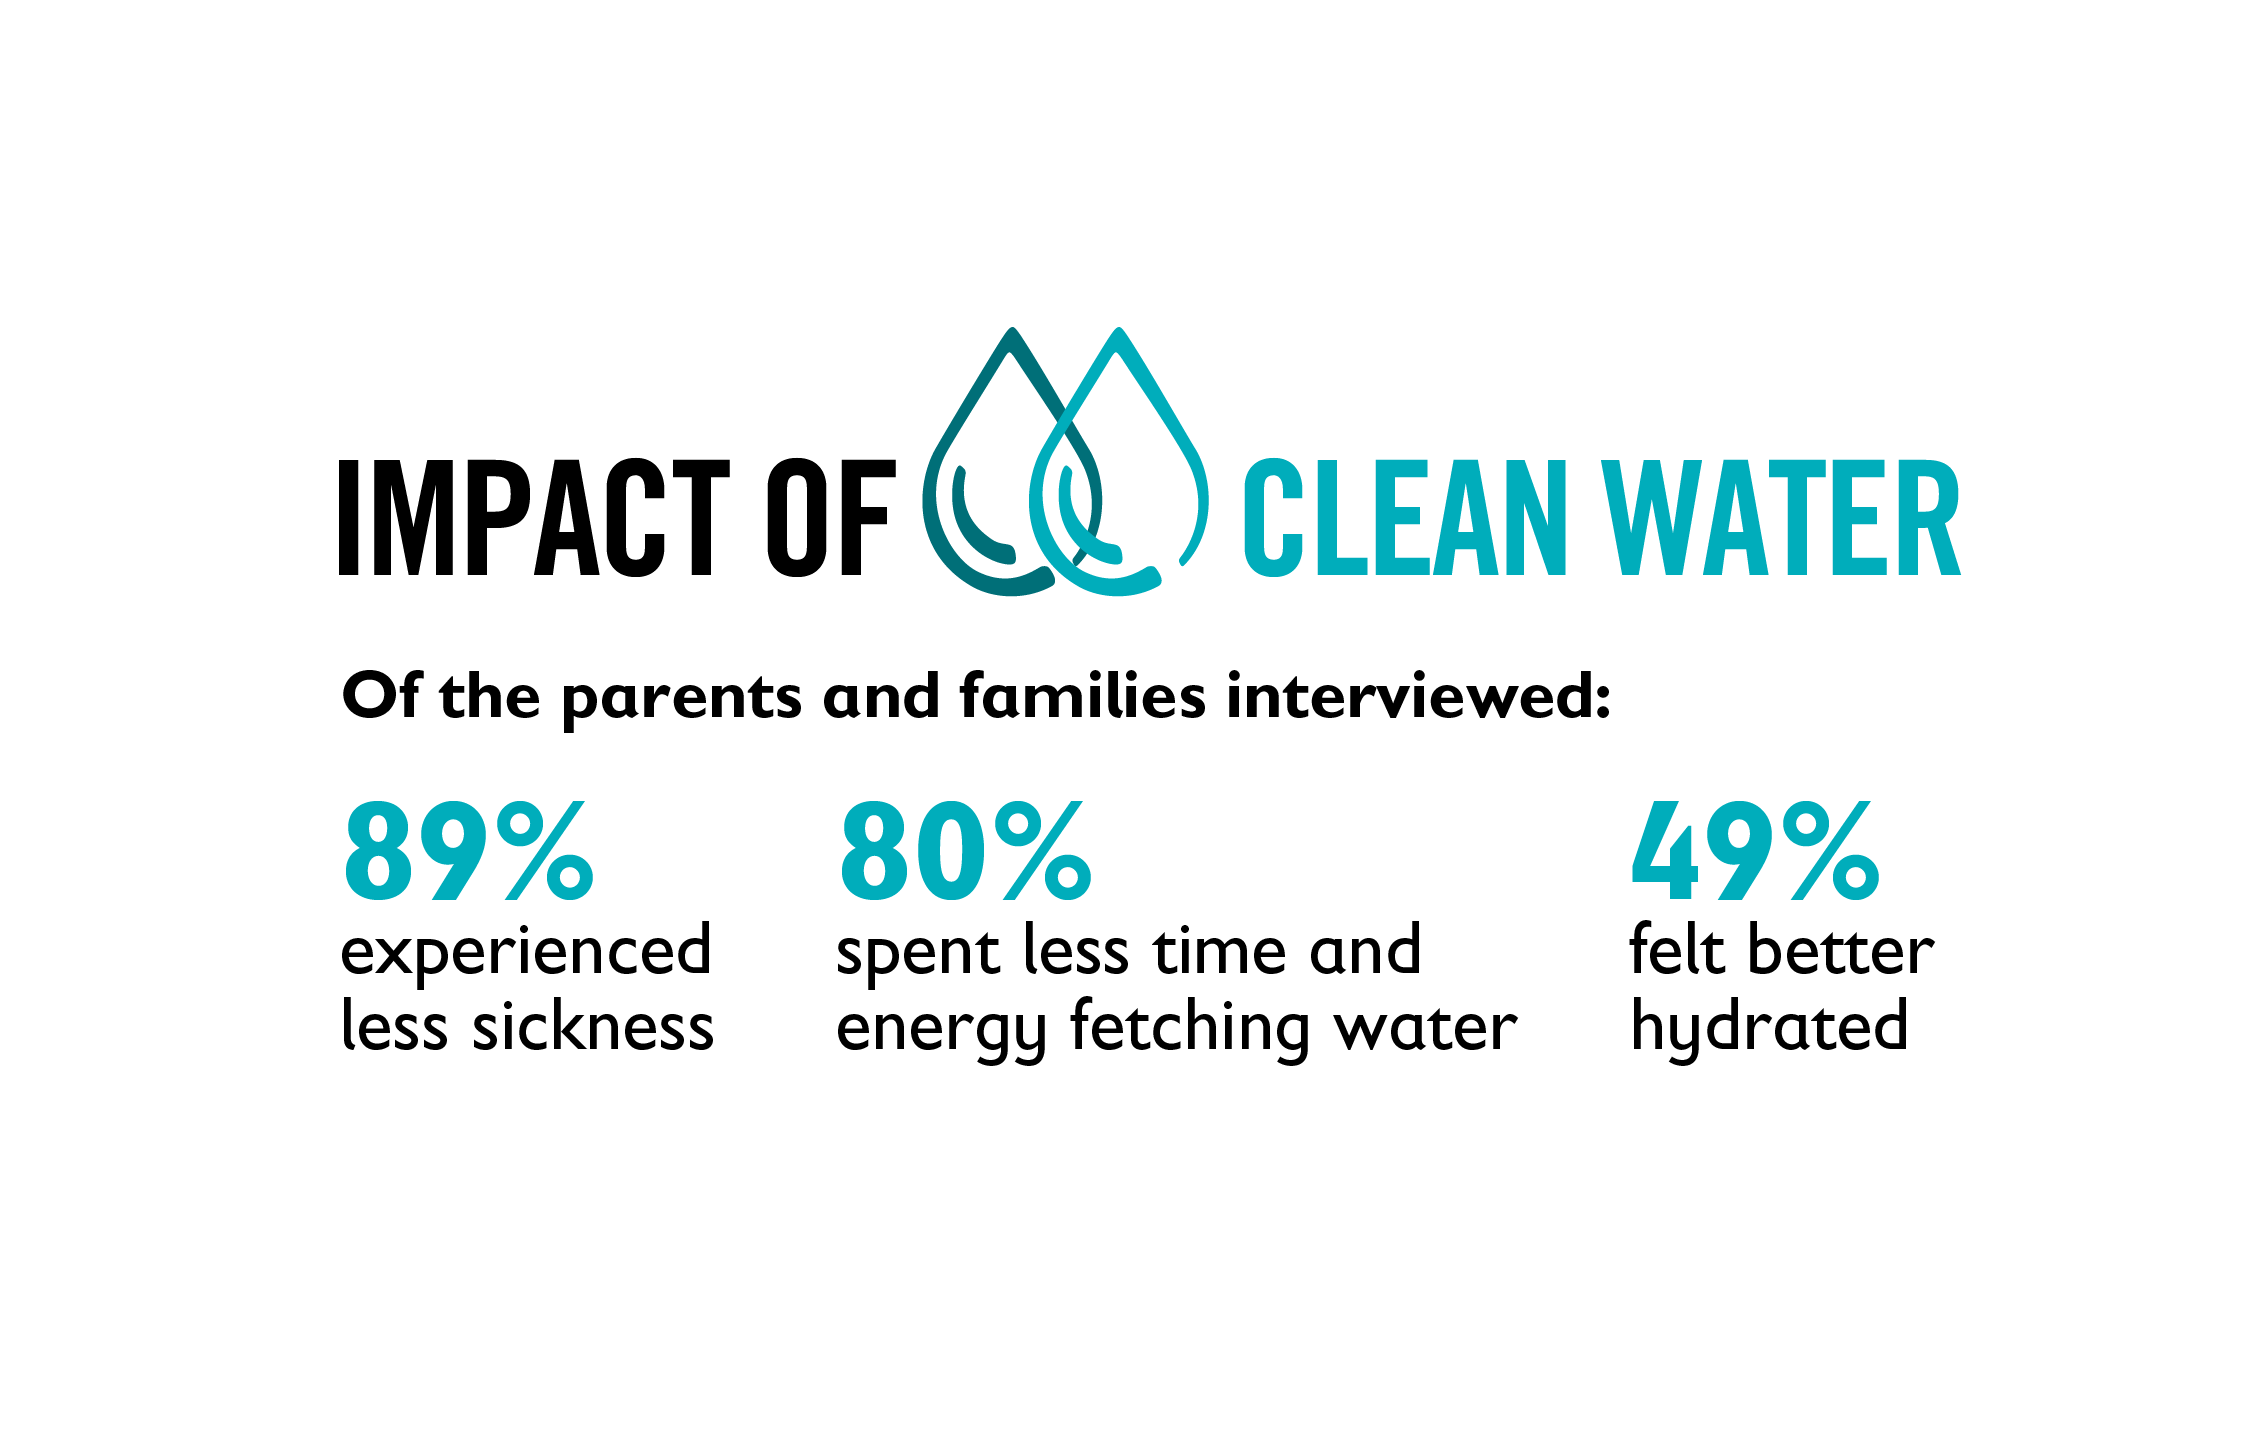 Graphic, "Impact of clean water"